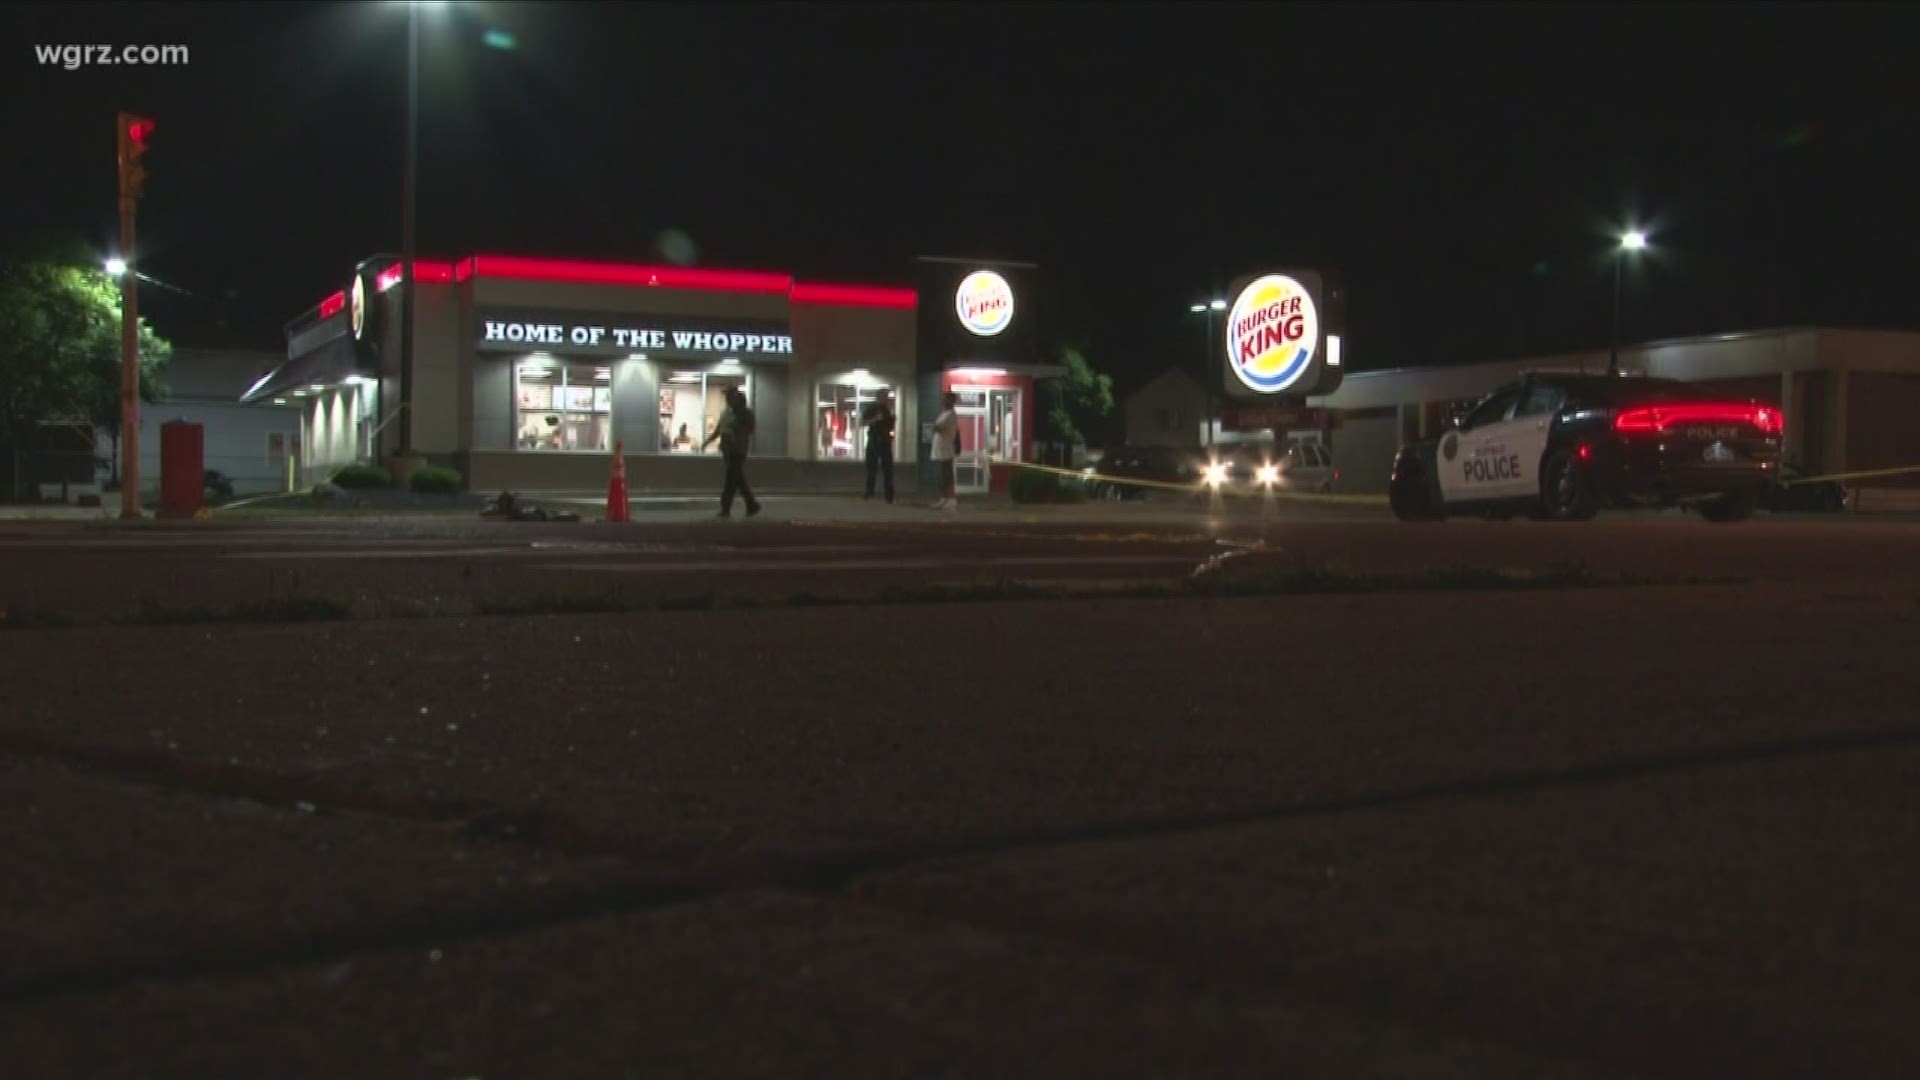 The man who was shot was a 56-year-old man working as a security guard at the Burger King.